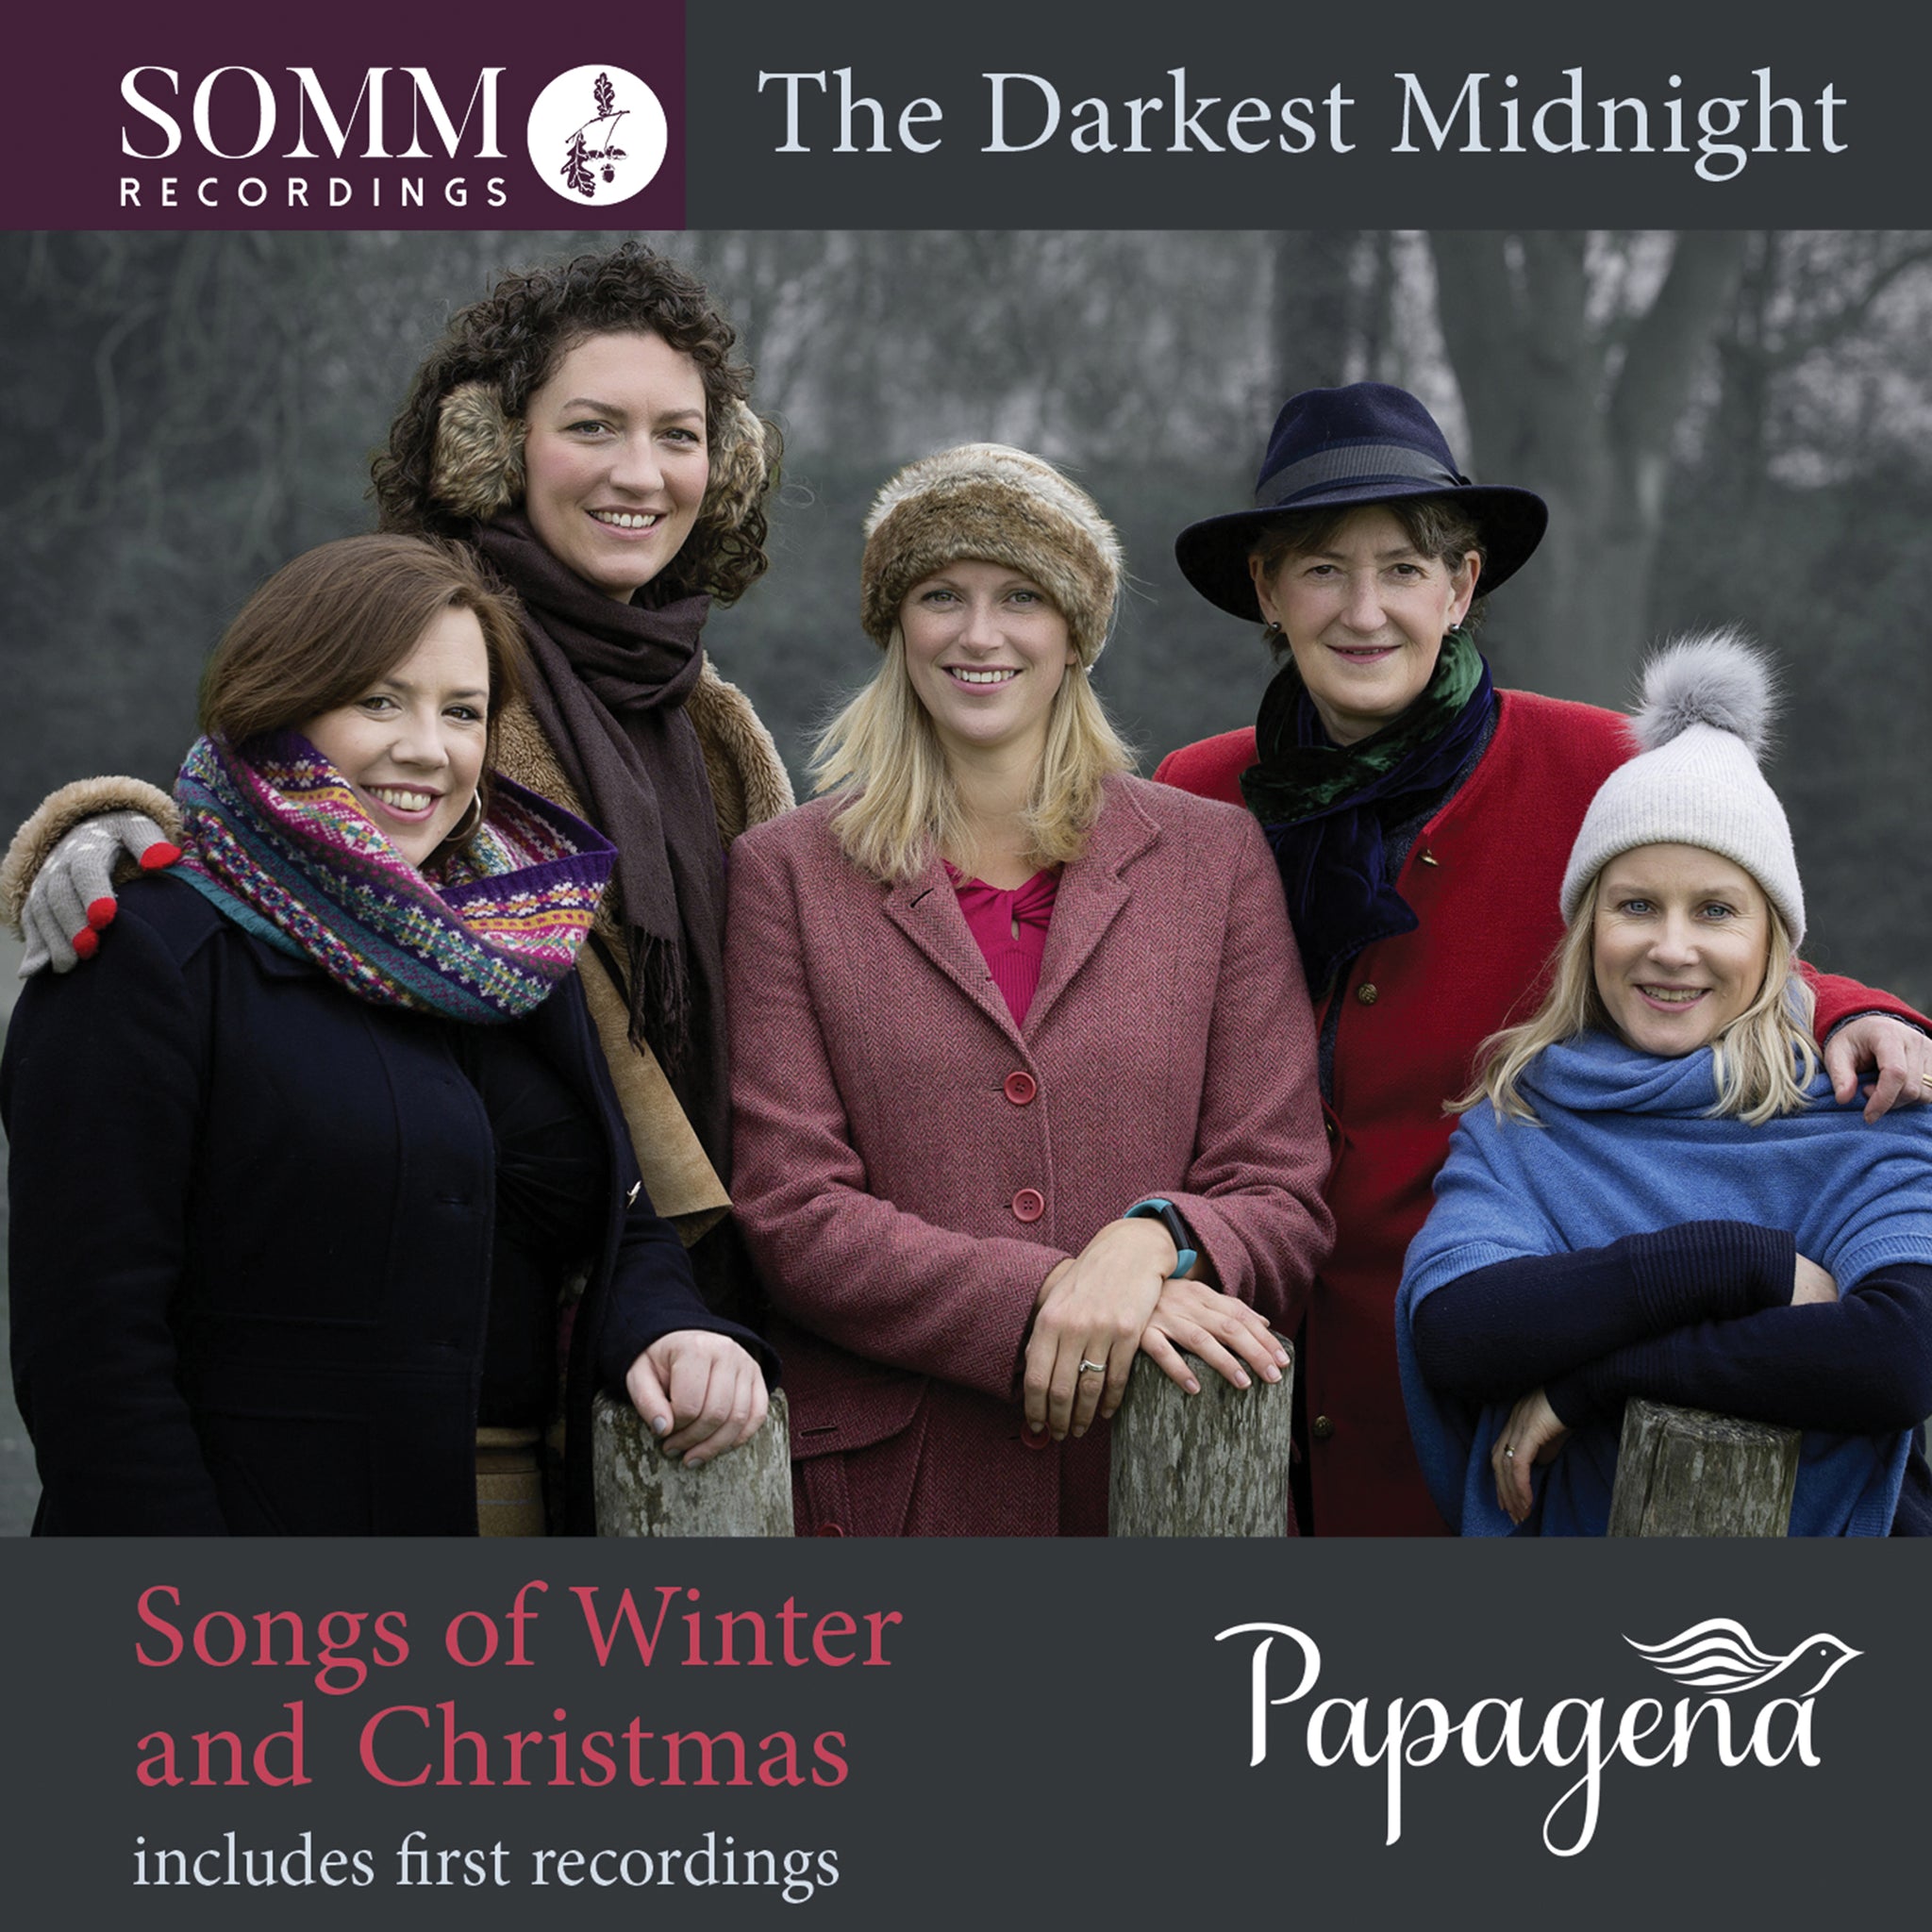 The Darkest Midnight - Winter Songs from Medieval to Modern / Papagena